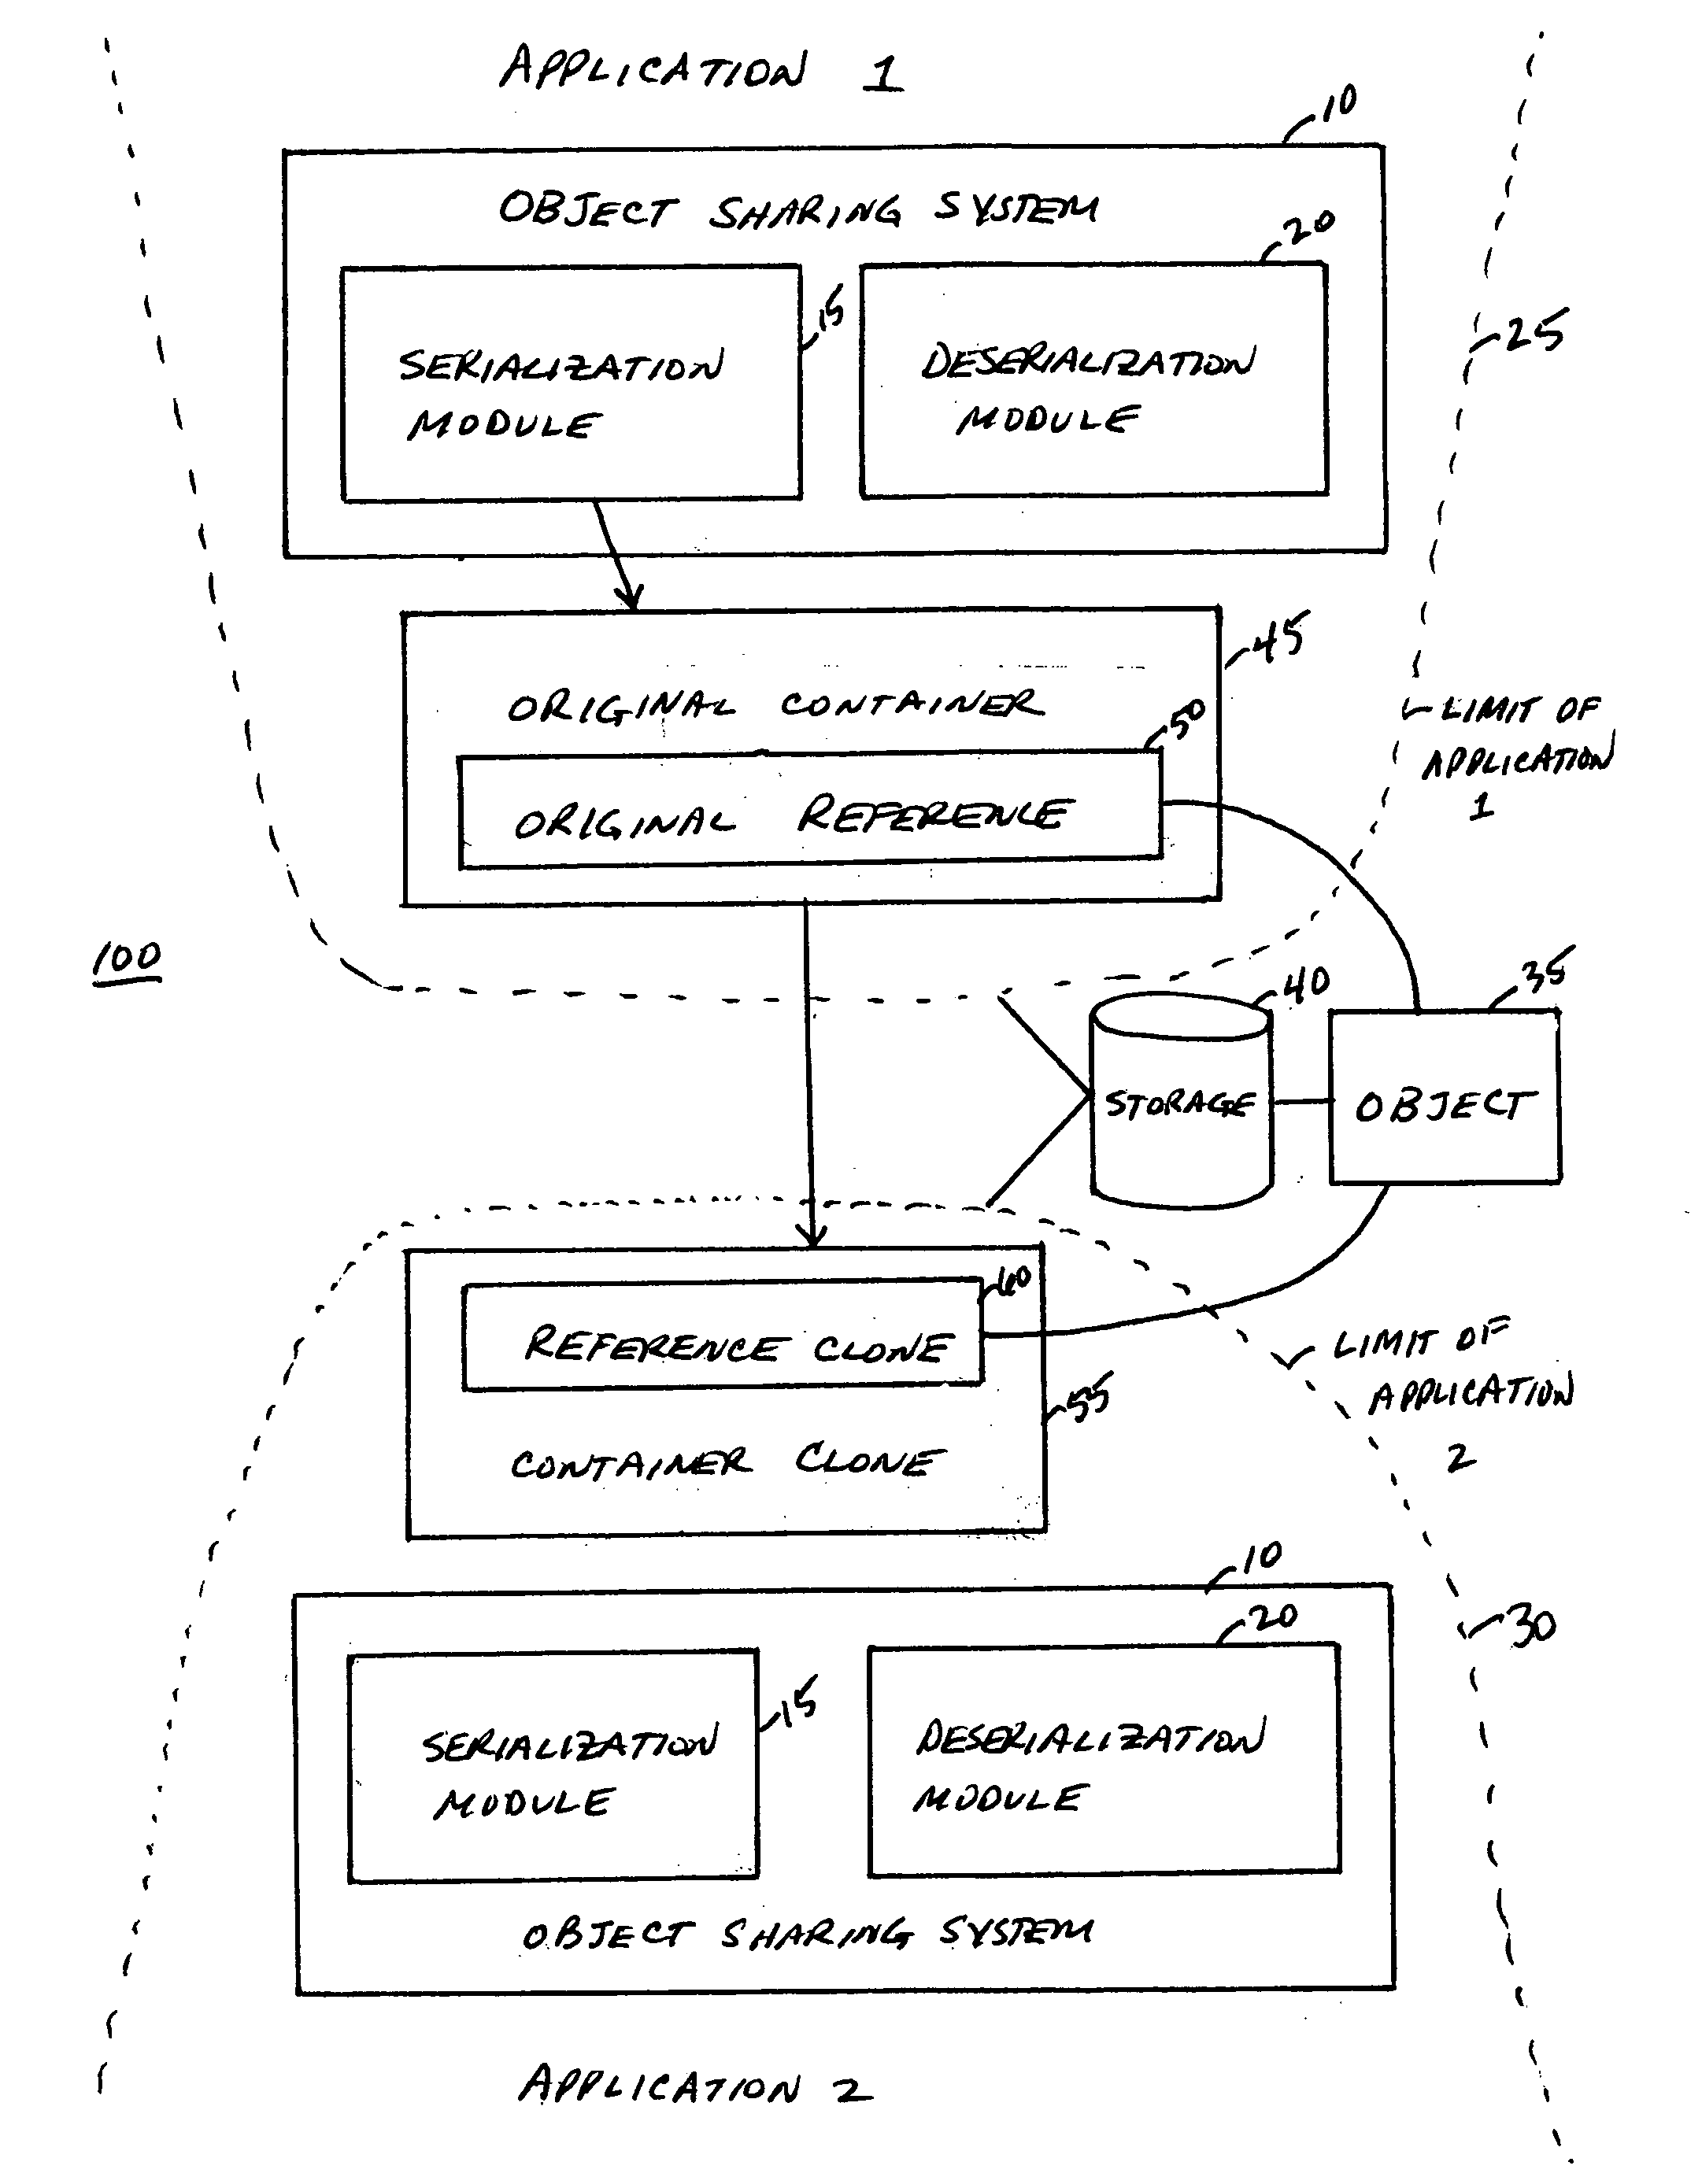 System and method for sharing an object between applications